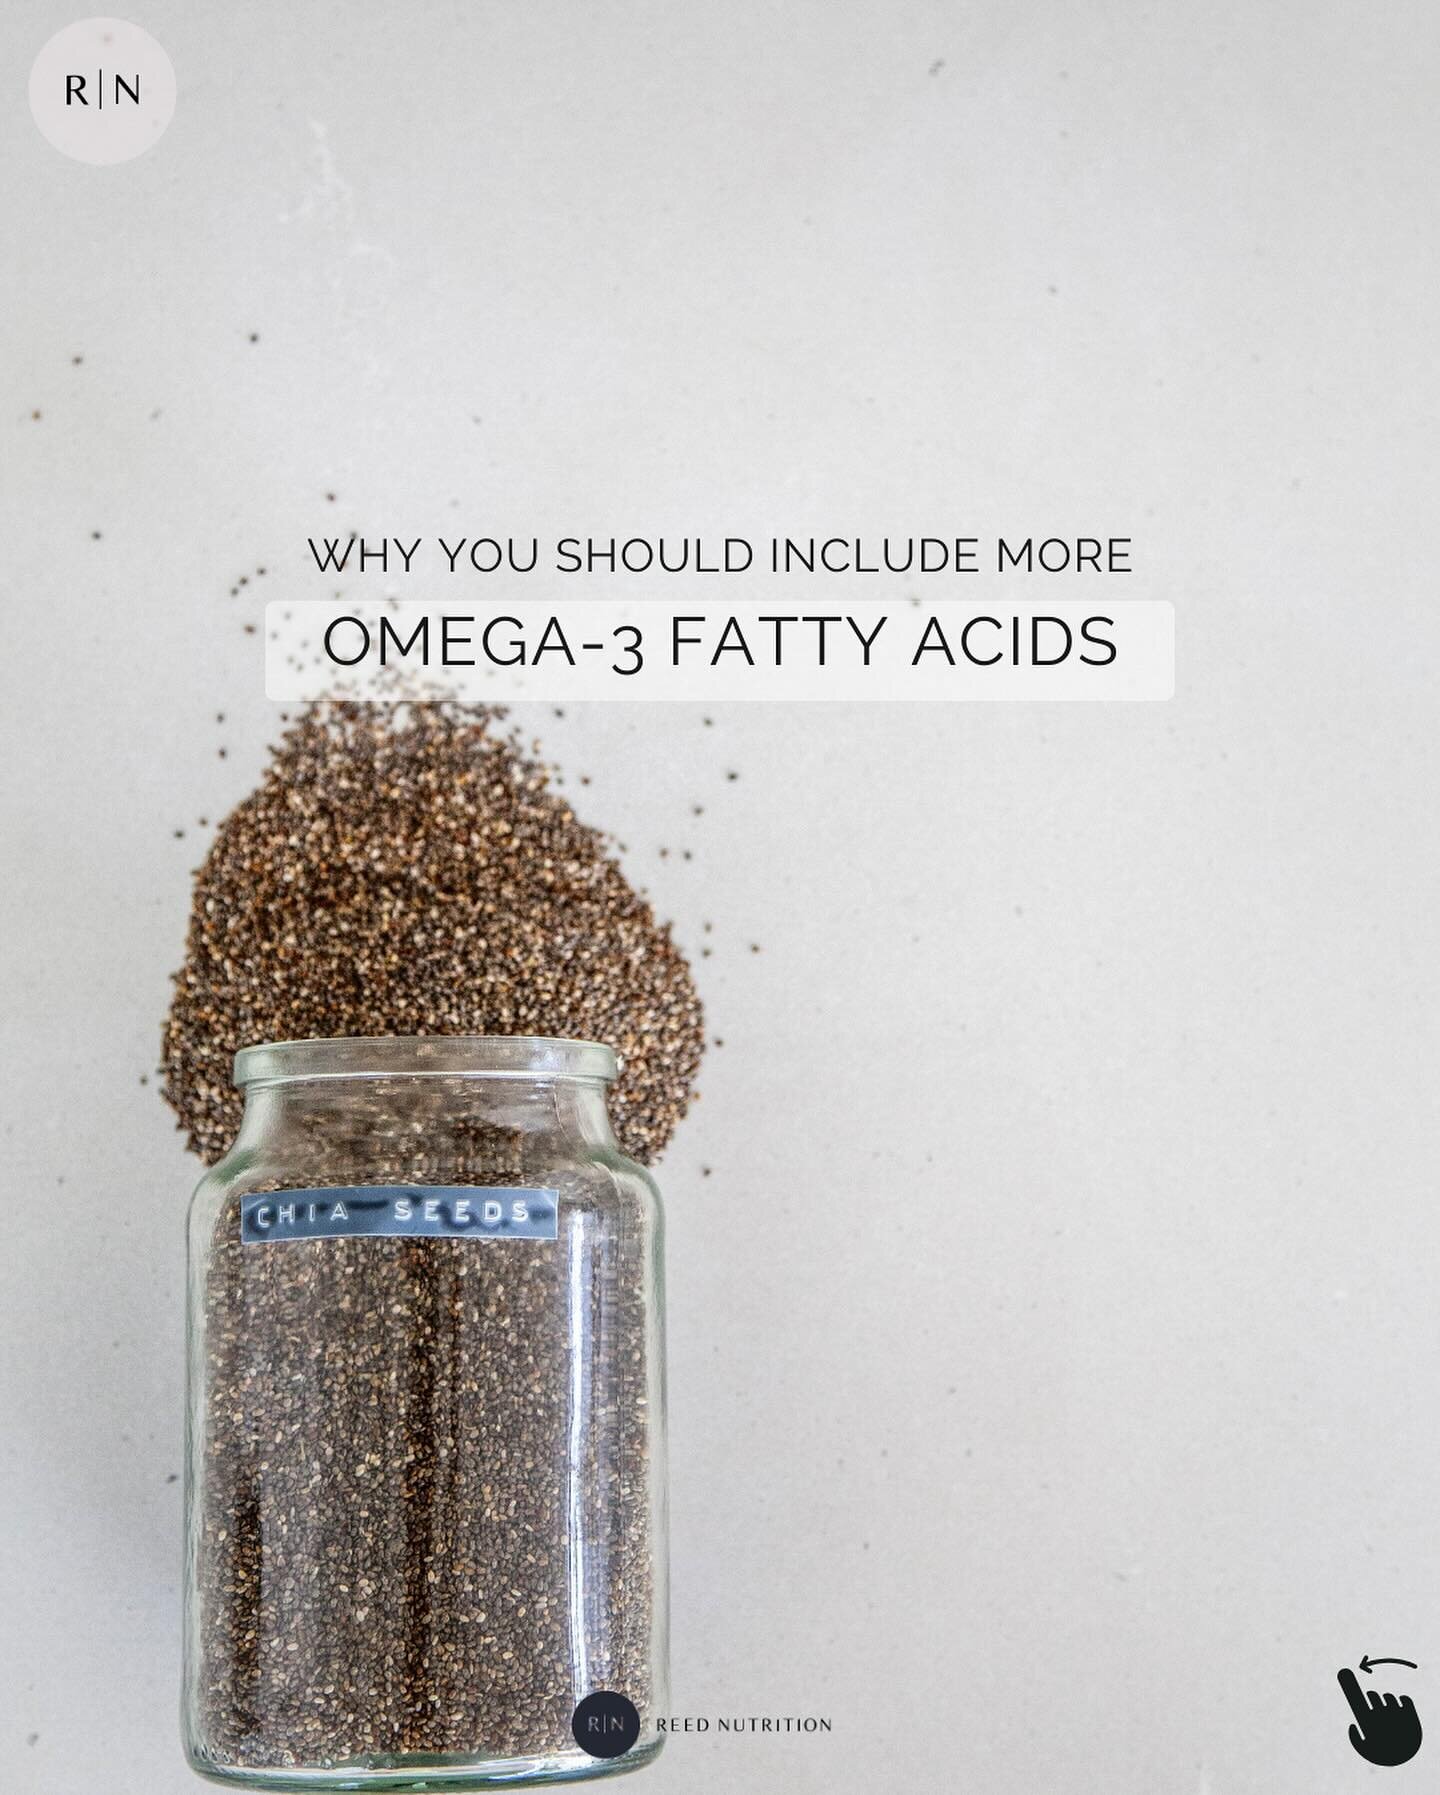 You may have heard about omega-3s fatty acids before. The Mediterranean Diet is rich in them and they&rsquo;re often promoted for their benefits for gut health, mental health, heart health, and more. But what exactly are omega-3s, are you getting eno